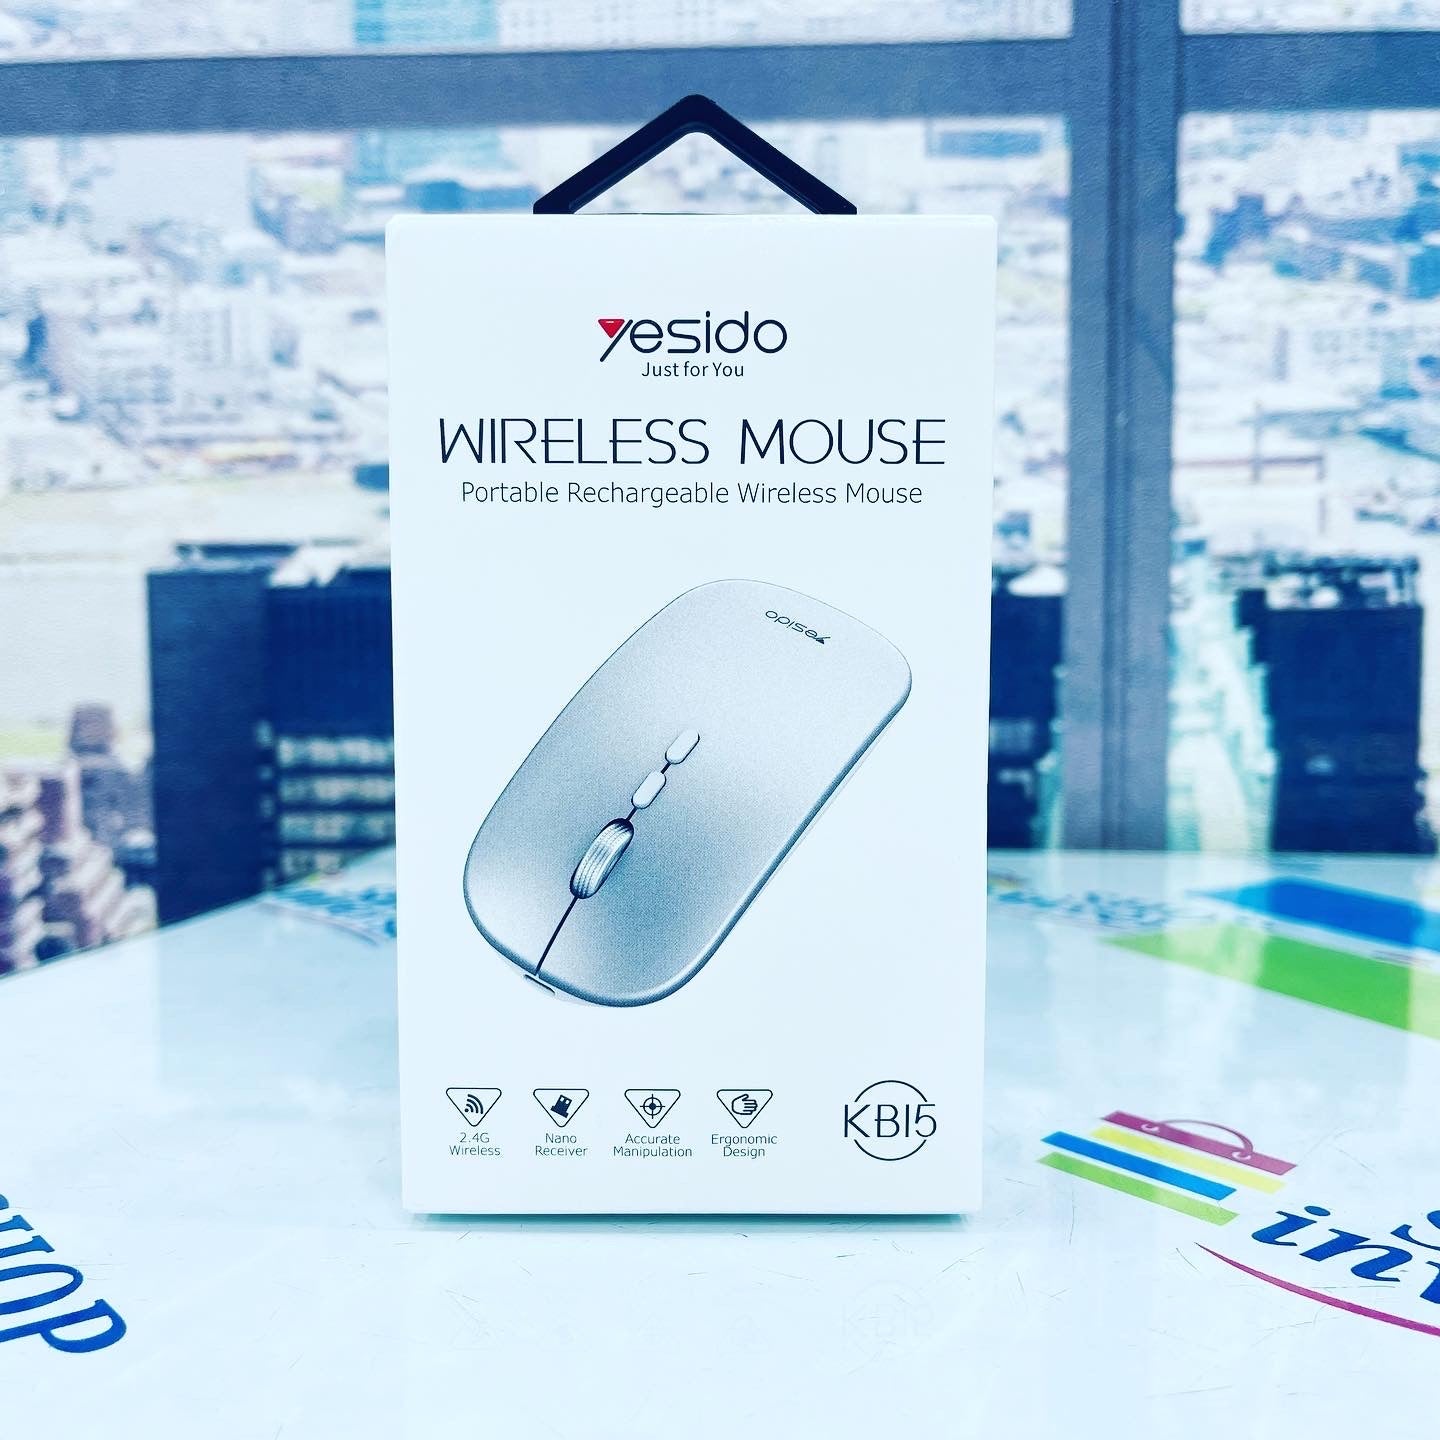 YESIDO KBI5 Portable Rechargeable Wireless Mouse SHOPINVERSE